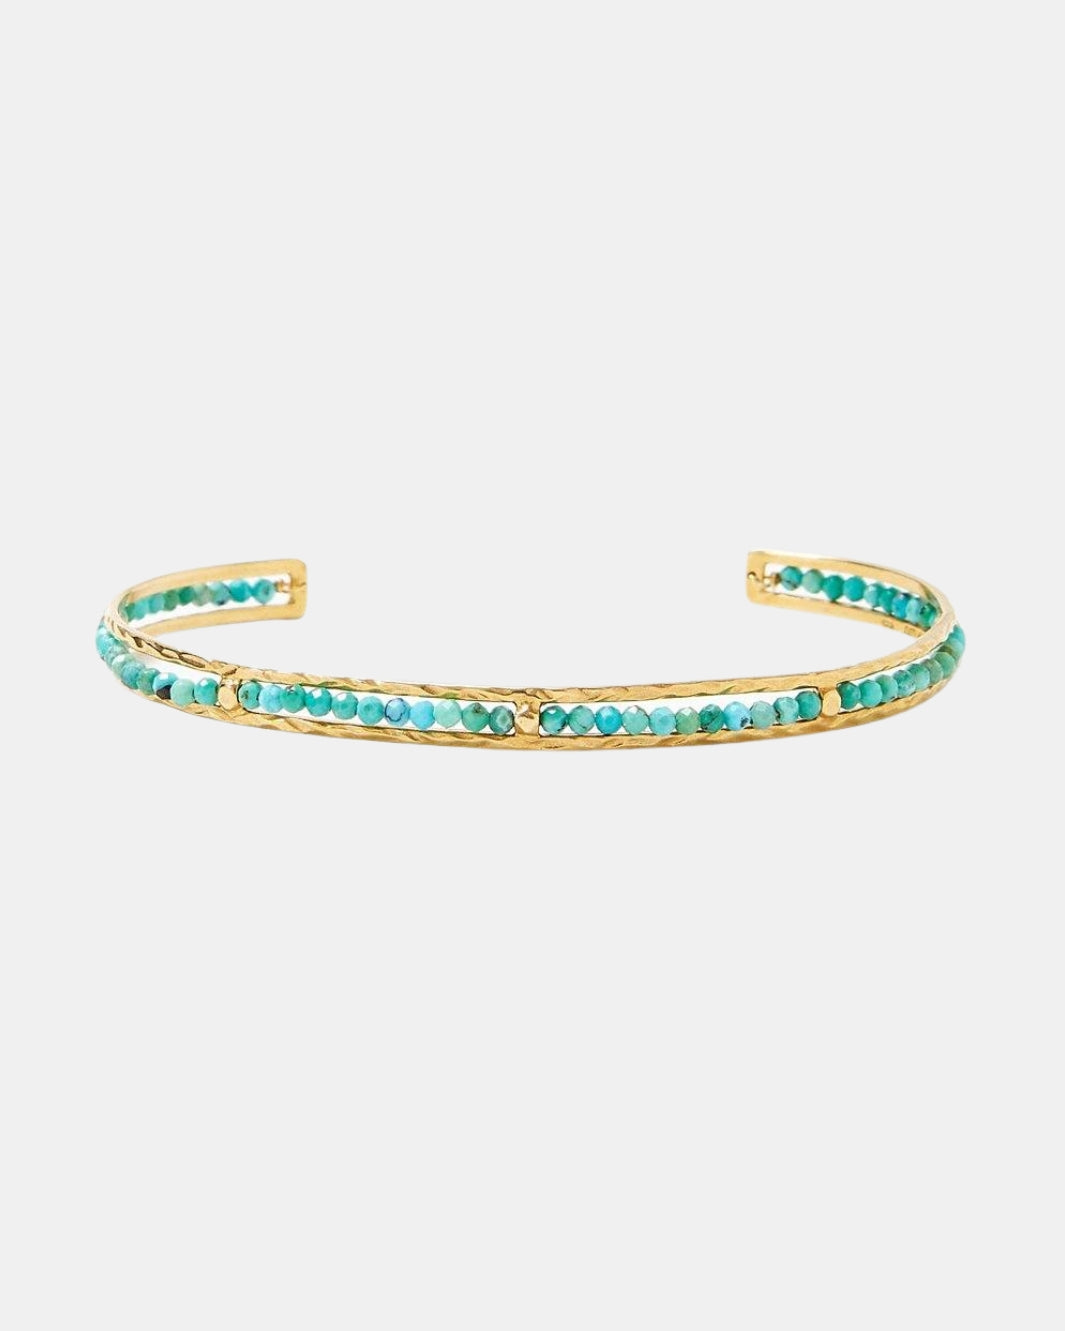 SEDONA BRACELET IN TURQUOISE AND GOLD - Romi Boutique